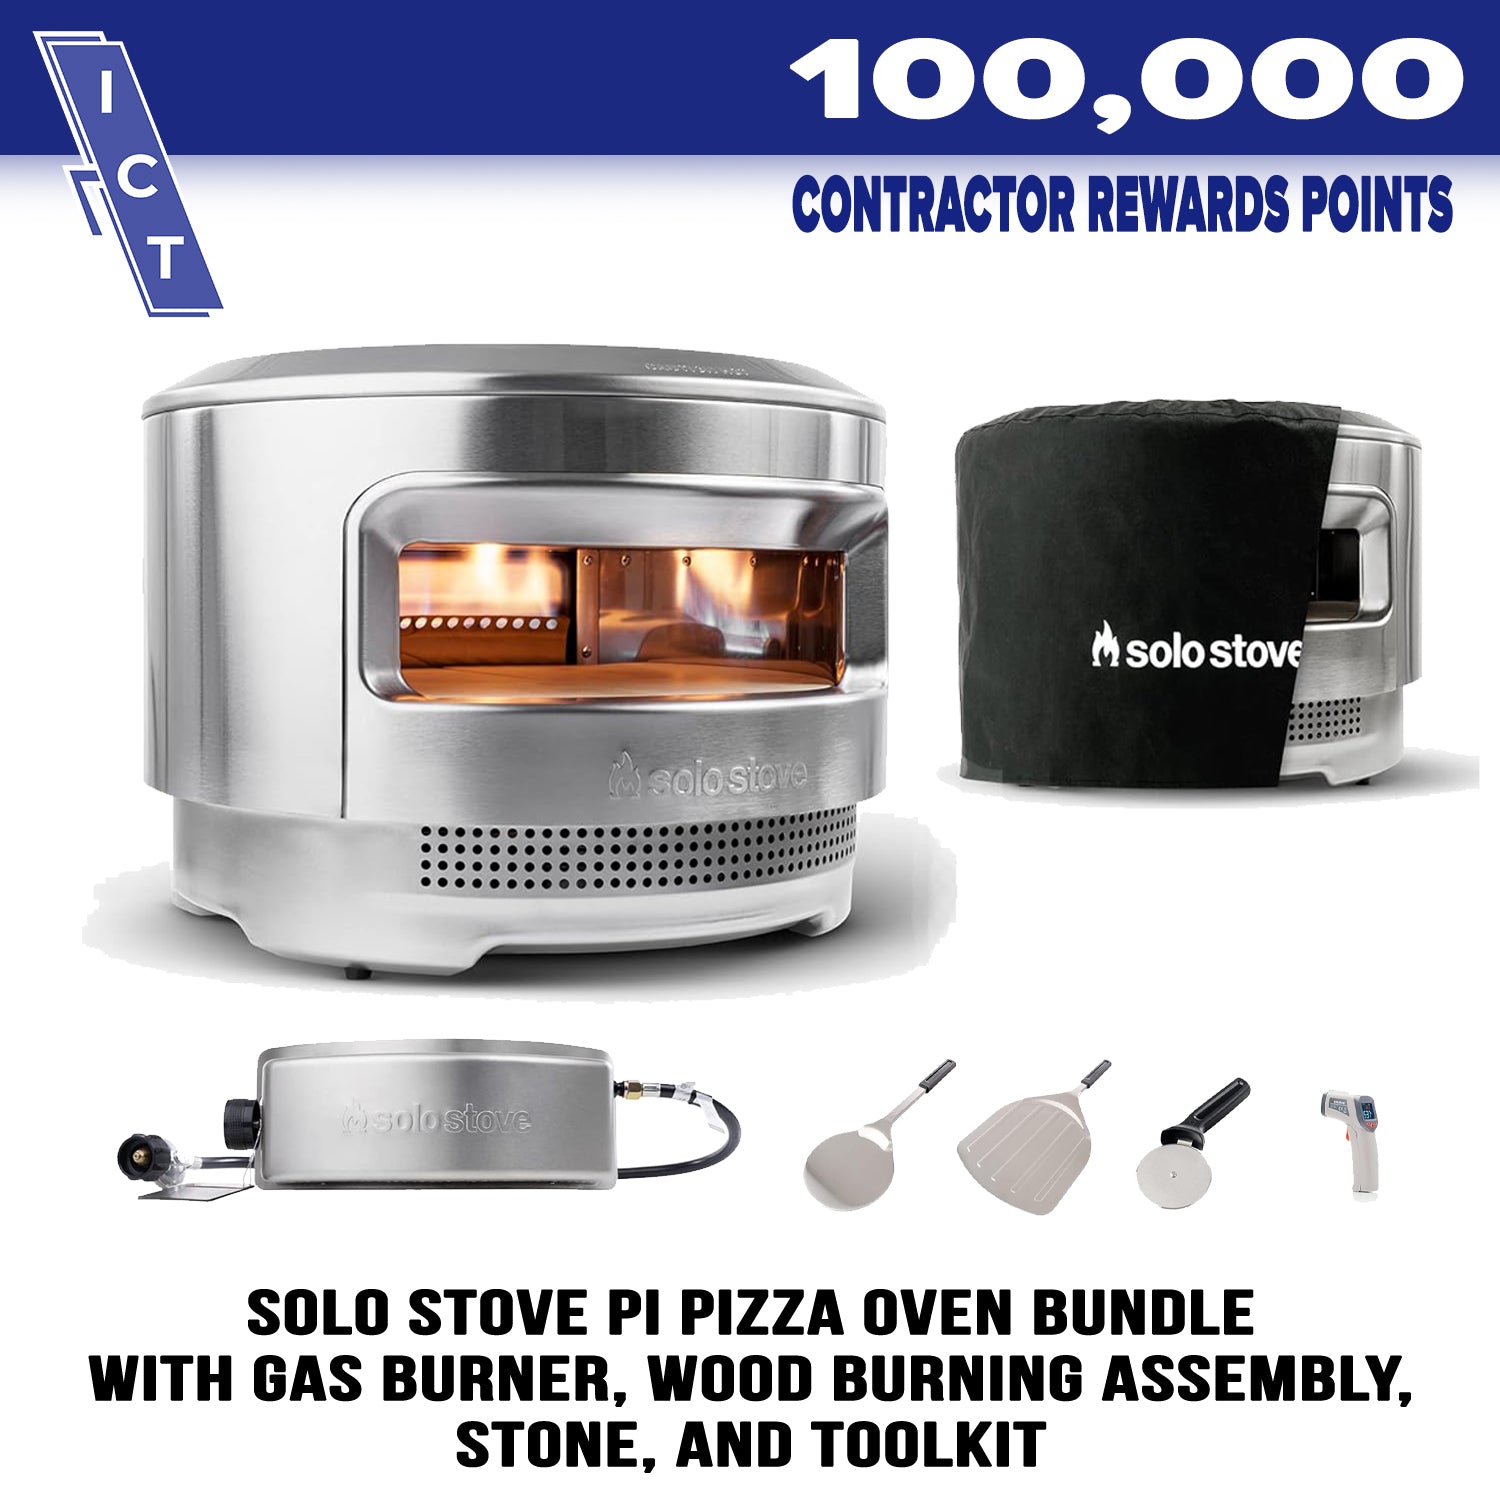 Solo Stove Pi Pizza Oven Bundle prize for 100,000 points